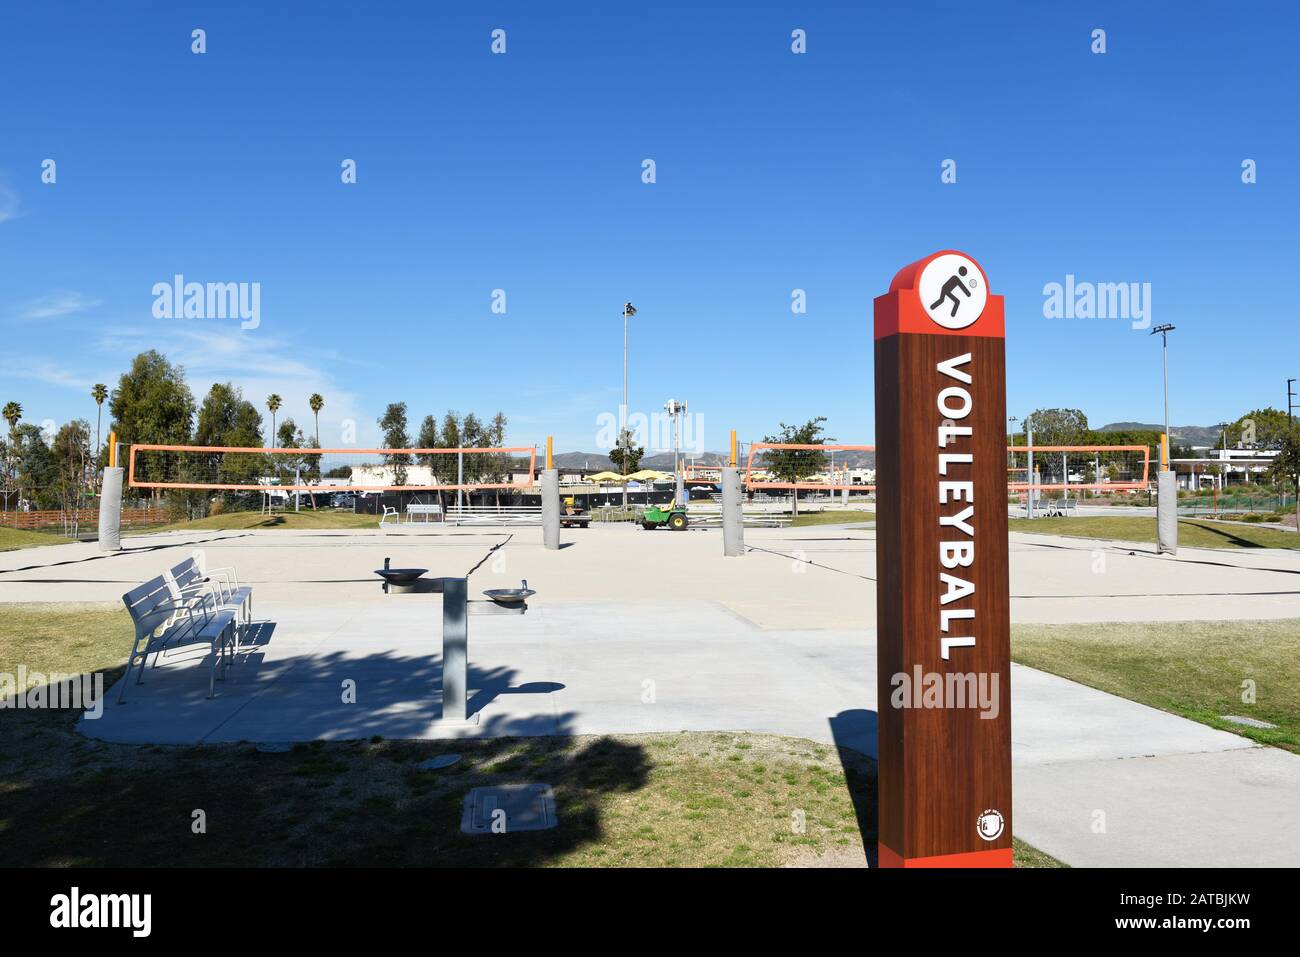 IRVINE, CALIFORNIA - 31 JAN 2020: Sand volleyball courts at the Orange County Great Park. Stock Photo